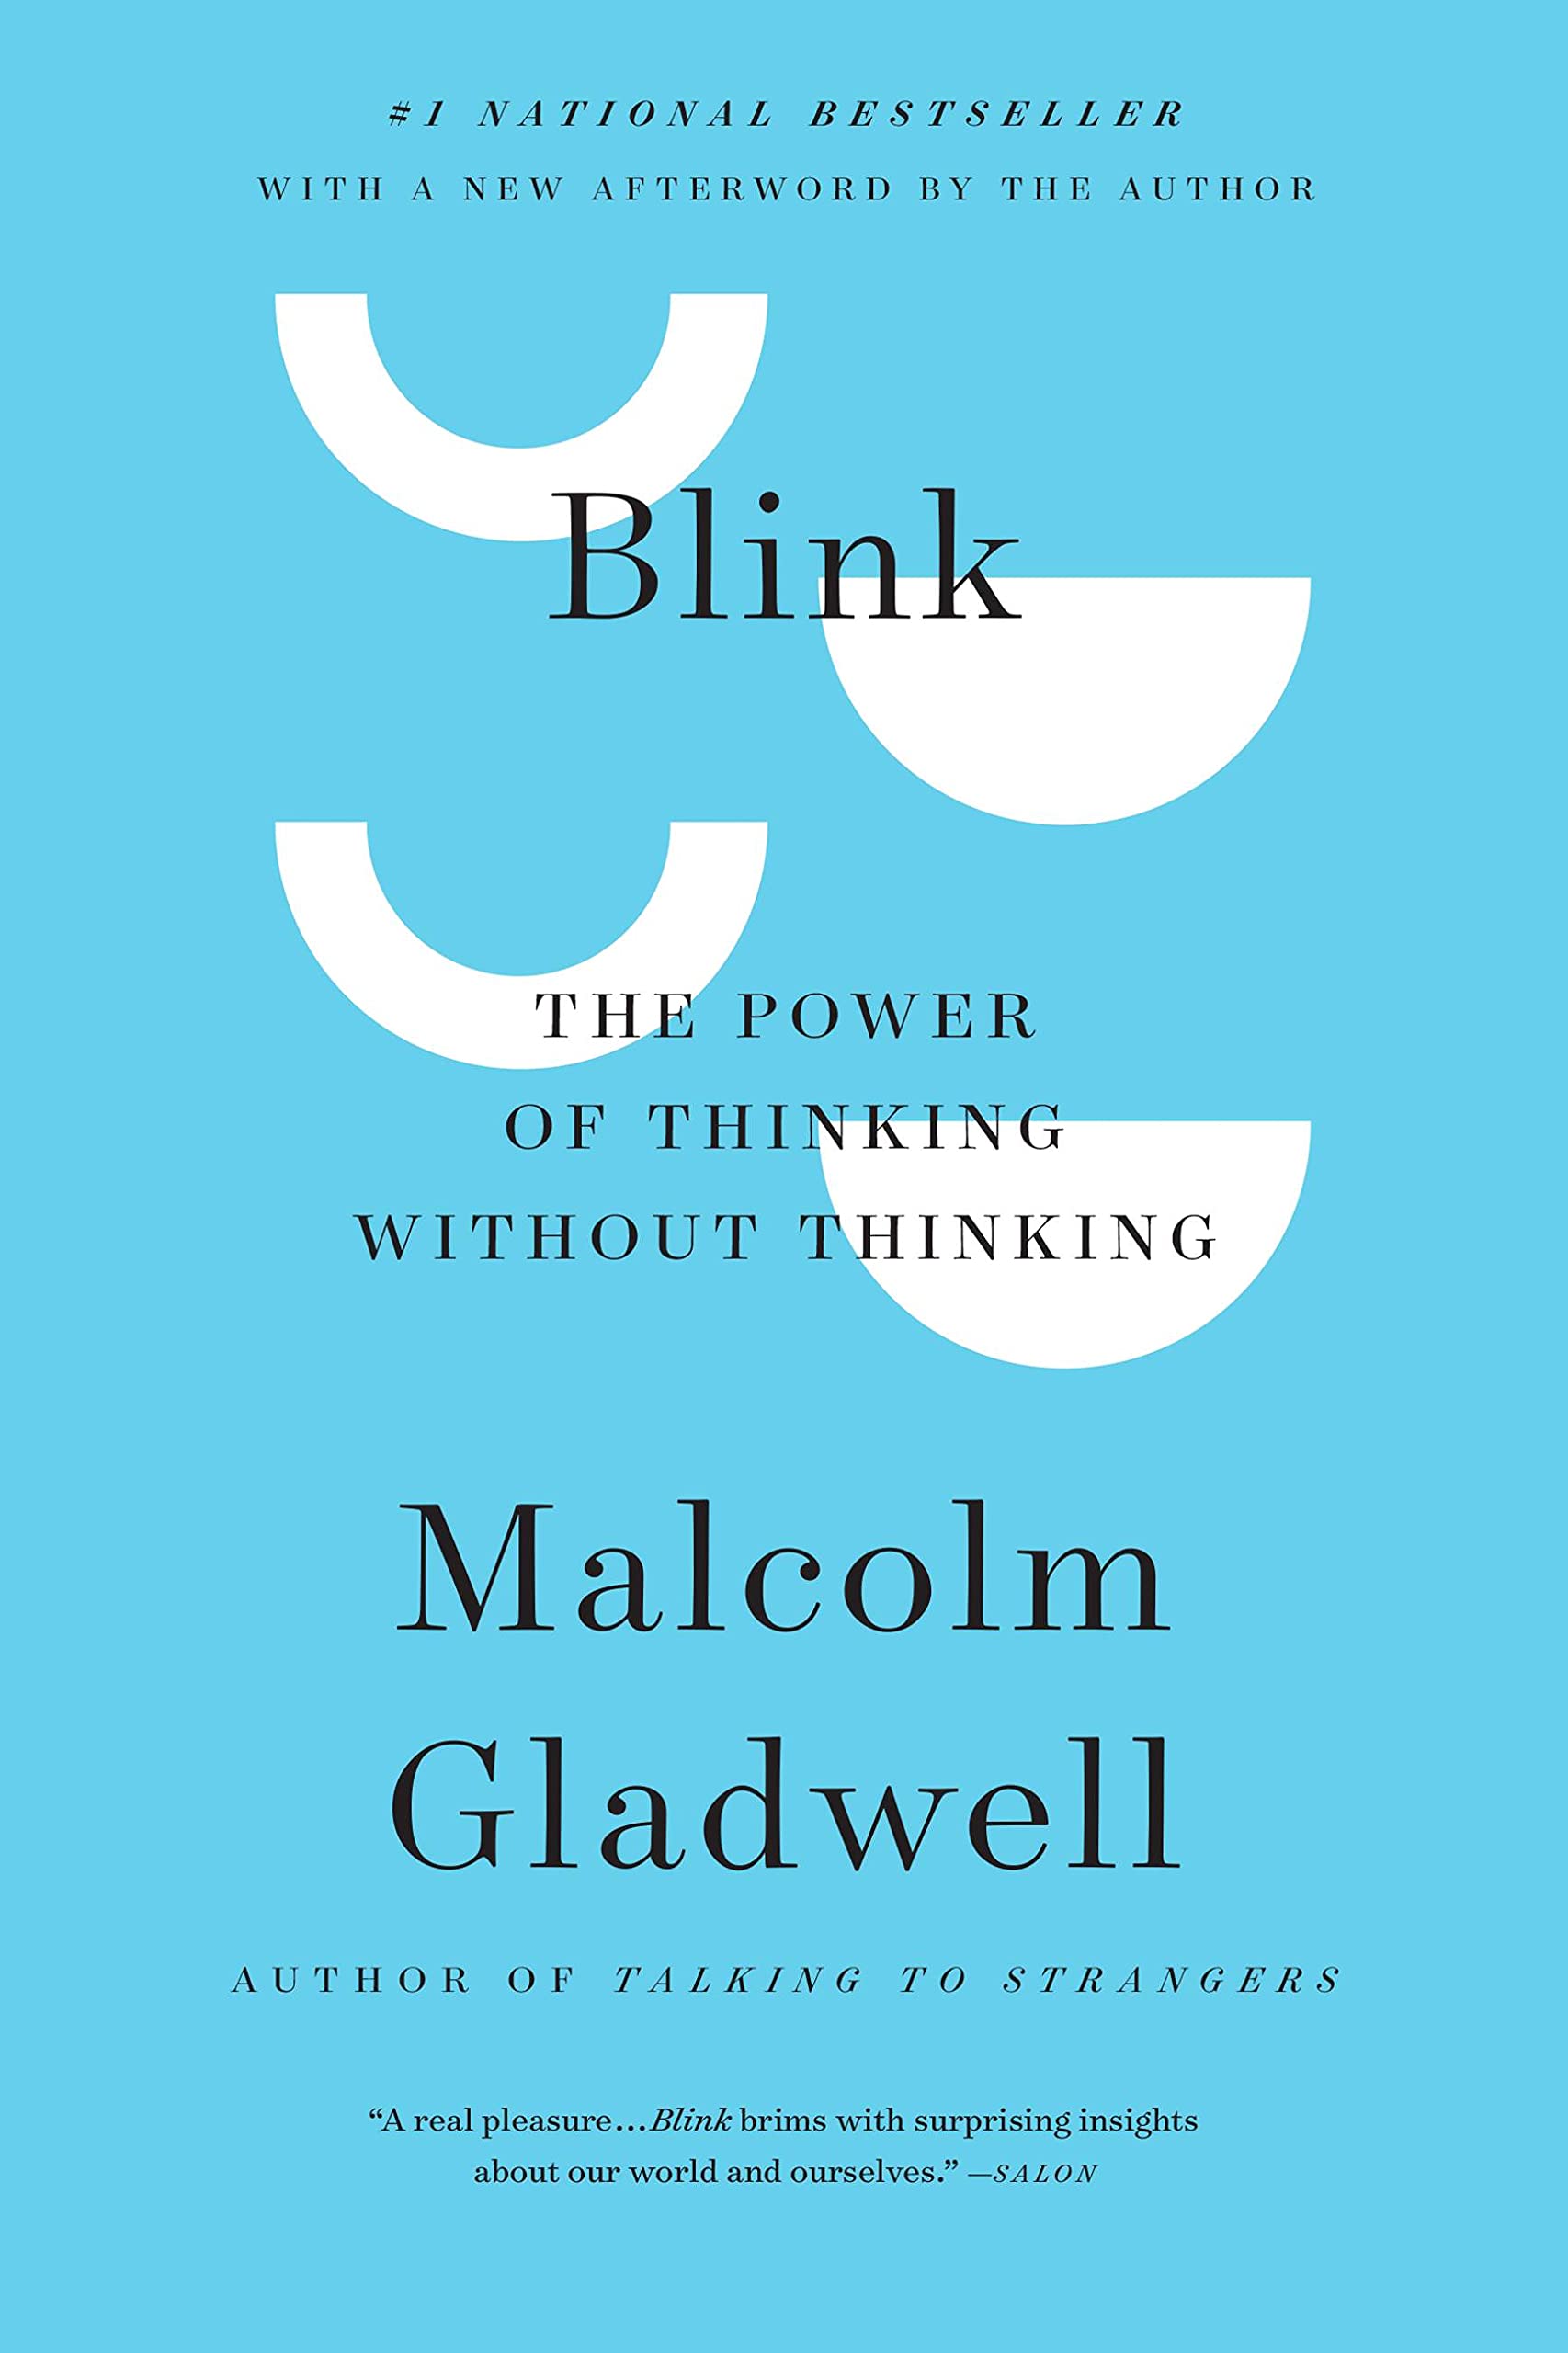 Blink: The Power of Thinking Without Thinking (eBook) by Malcolm Gladwell $2.99